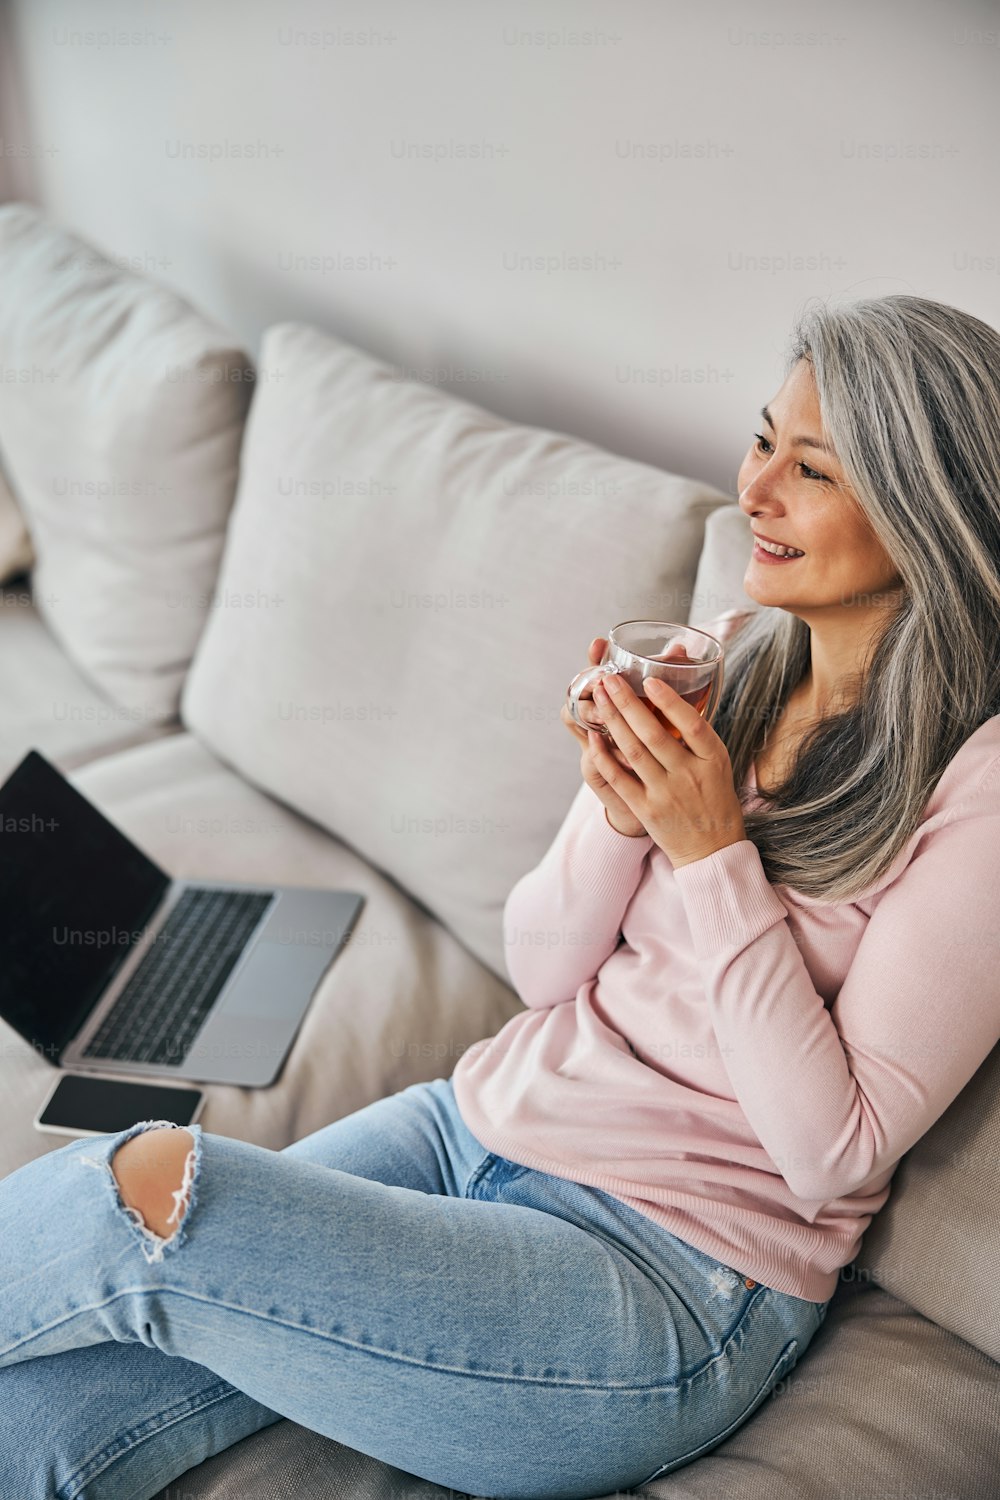 Beautiful lady holding cup of hot drink and smiling while resting on comfortable couch with laptop